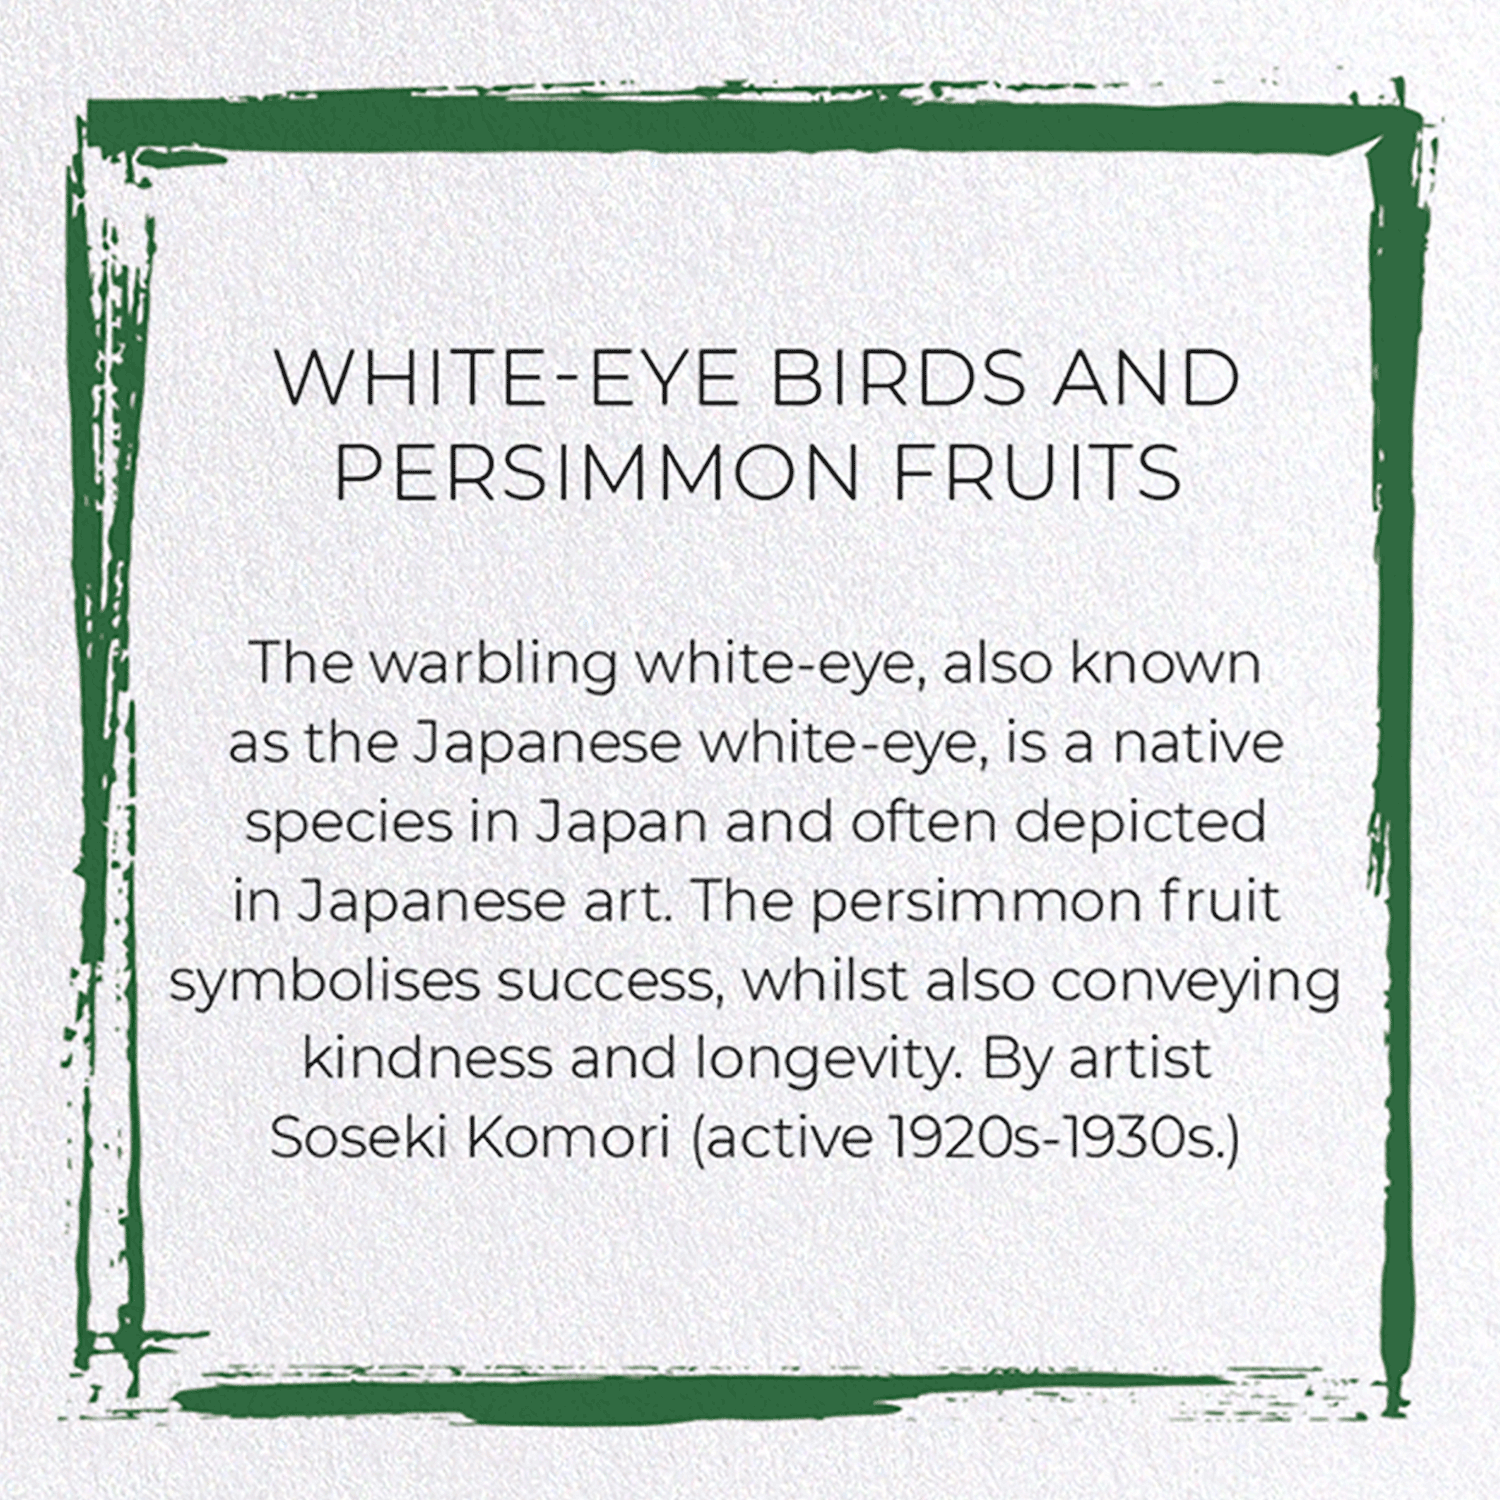 WHITE-EYE BIRDS AND PERSIMMON FRUITS